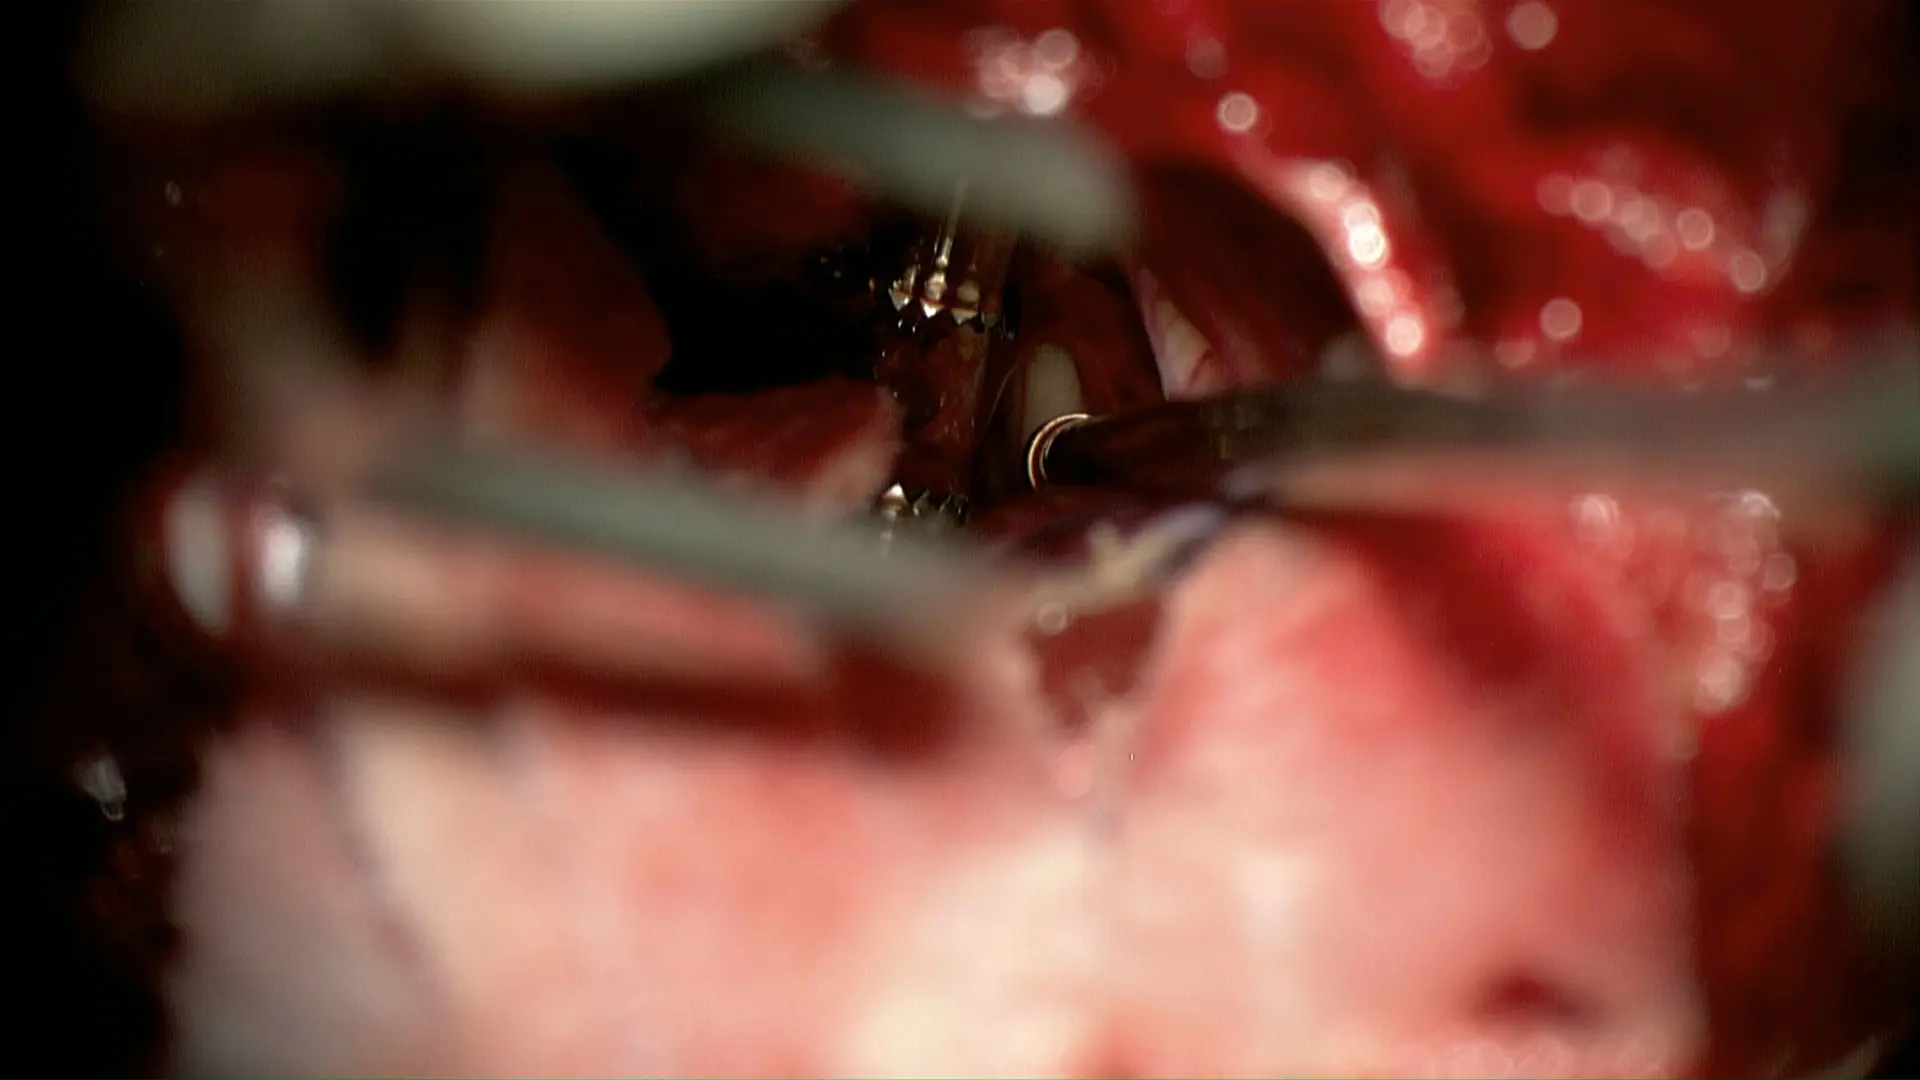 An infratentorial supracerebellar approach was used to debulk the tumor. The third ventricle is seen at the tip of the suction over the top of the cerebellum after the tumor has been partially resected.